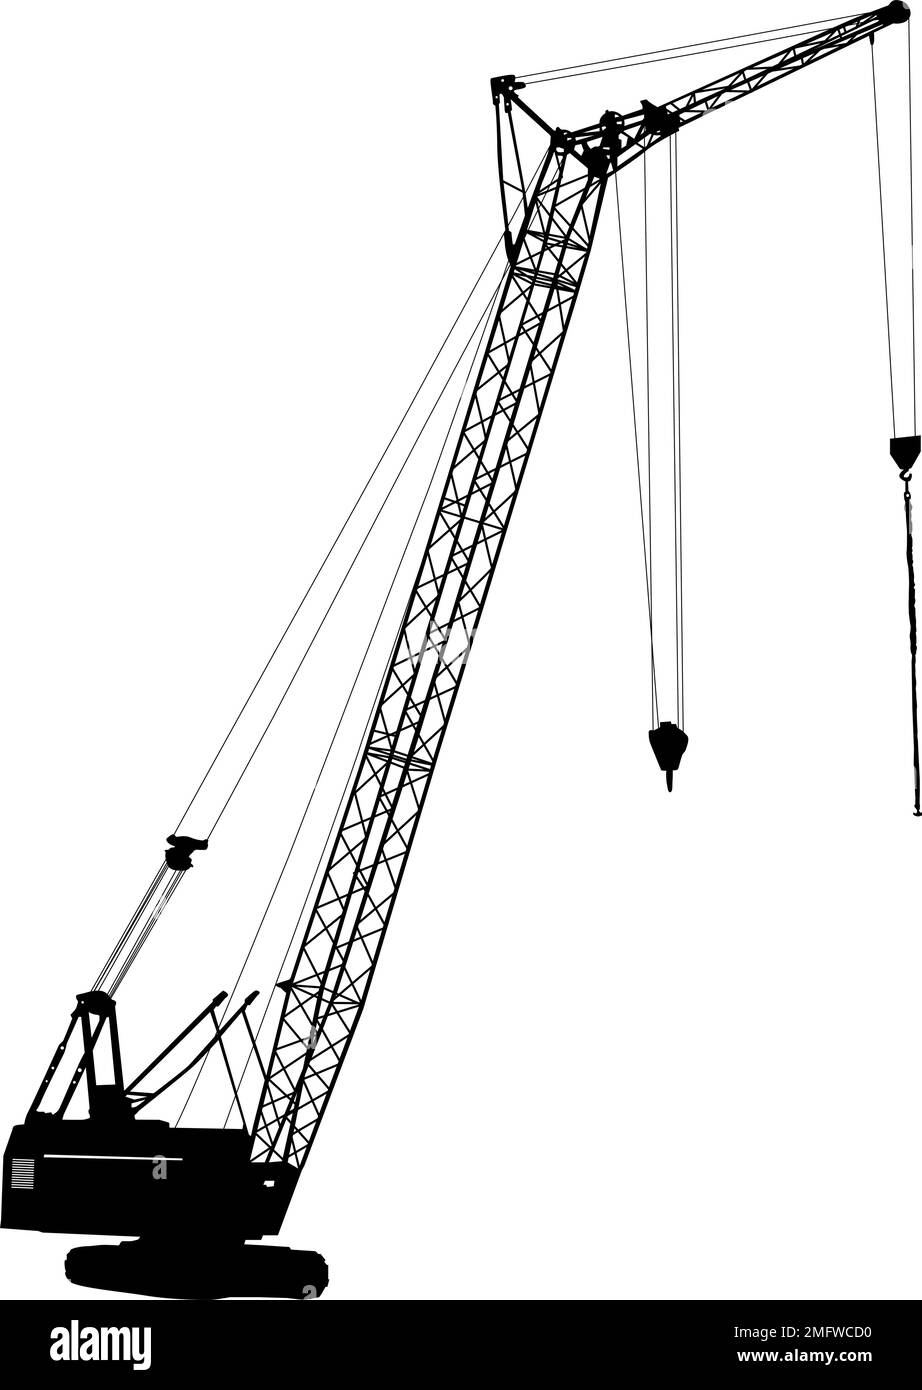 Working crane in sea port for cargo industry design on a white background. Stock Vector